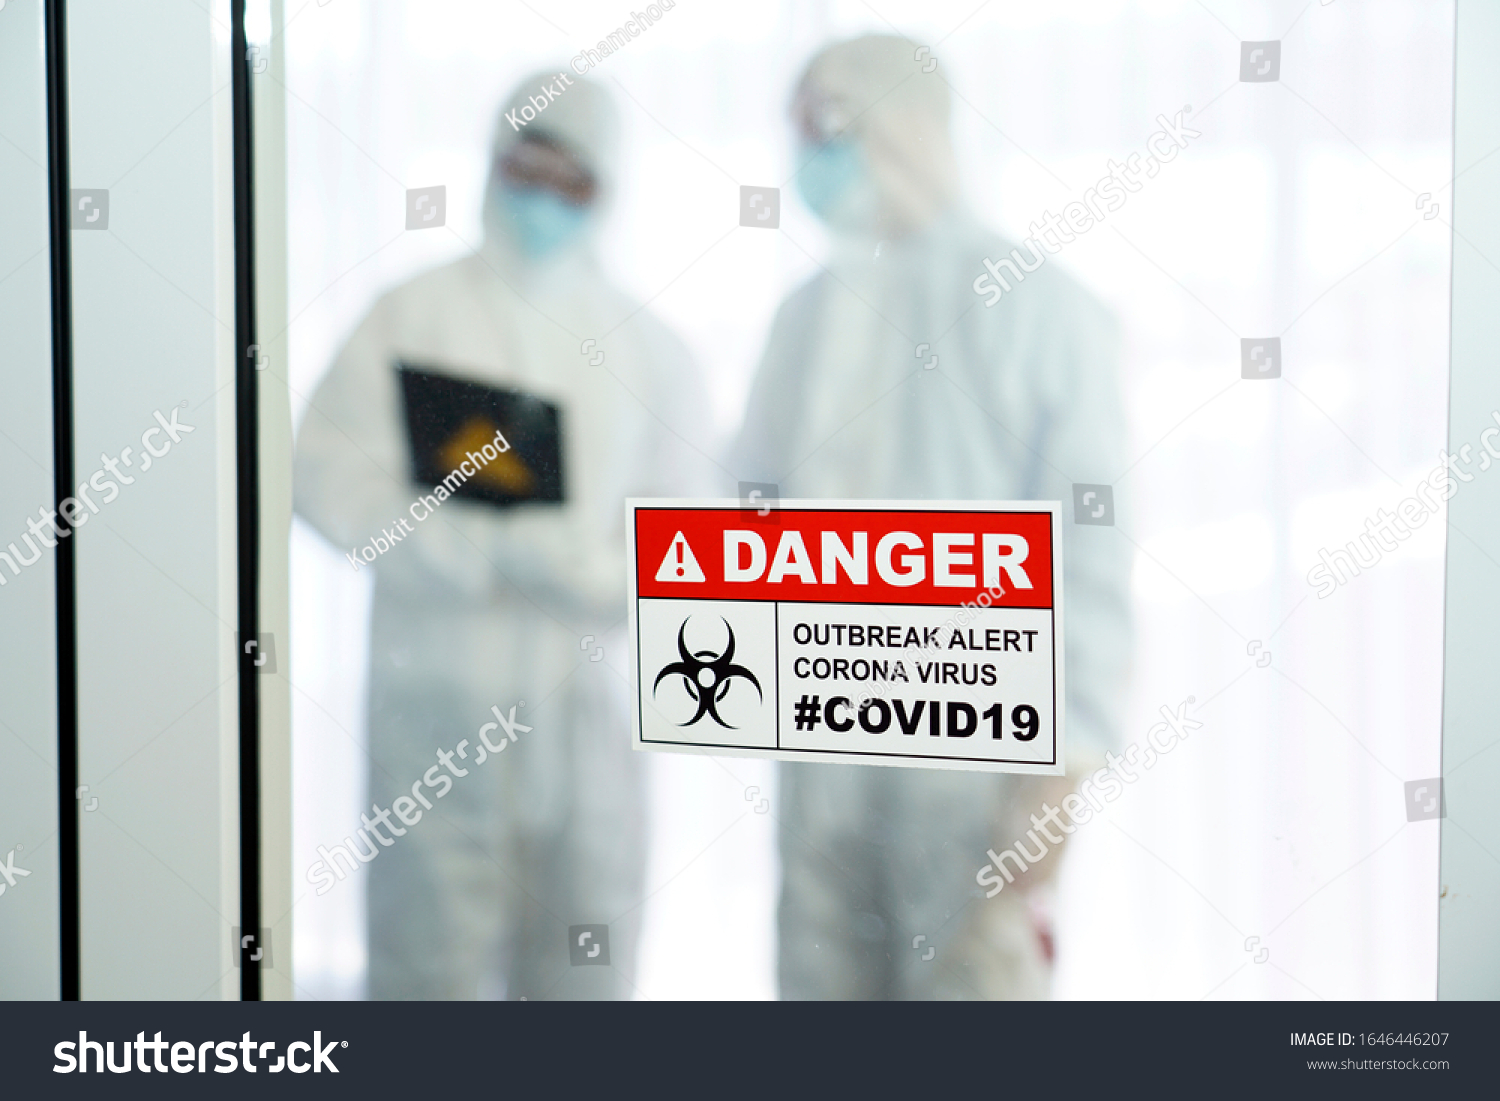 Outbreak alert Coronavirus COVID 19, COVID 19 signage in front of control area with doctors in personal protective equipment inside. #1646446207